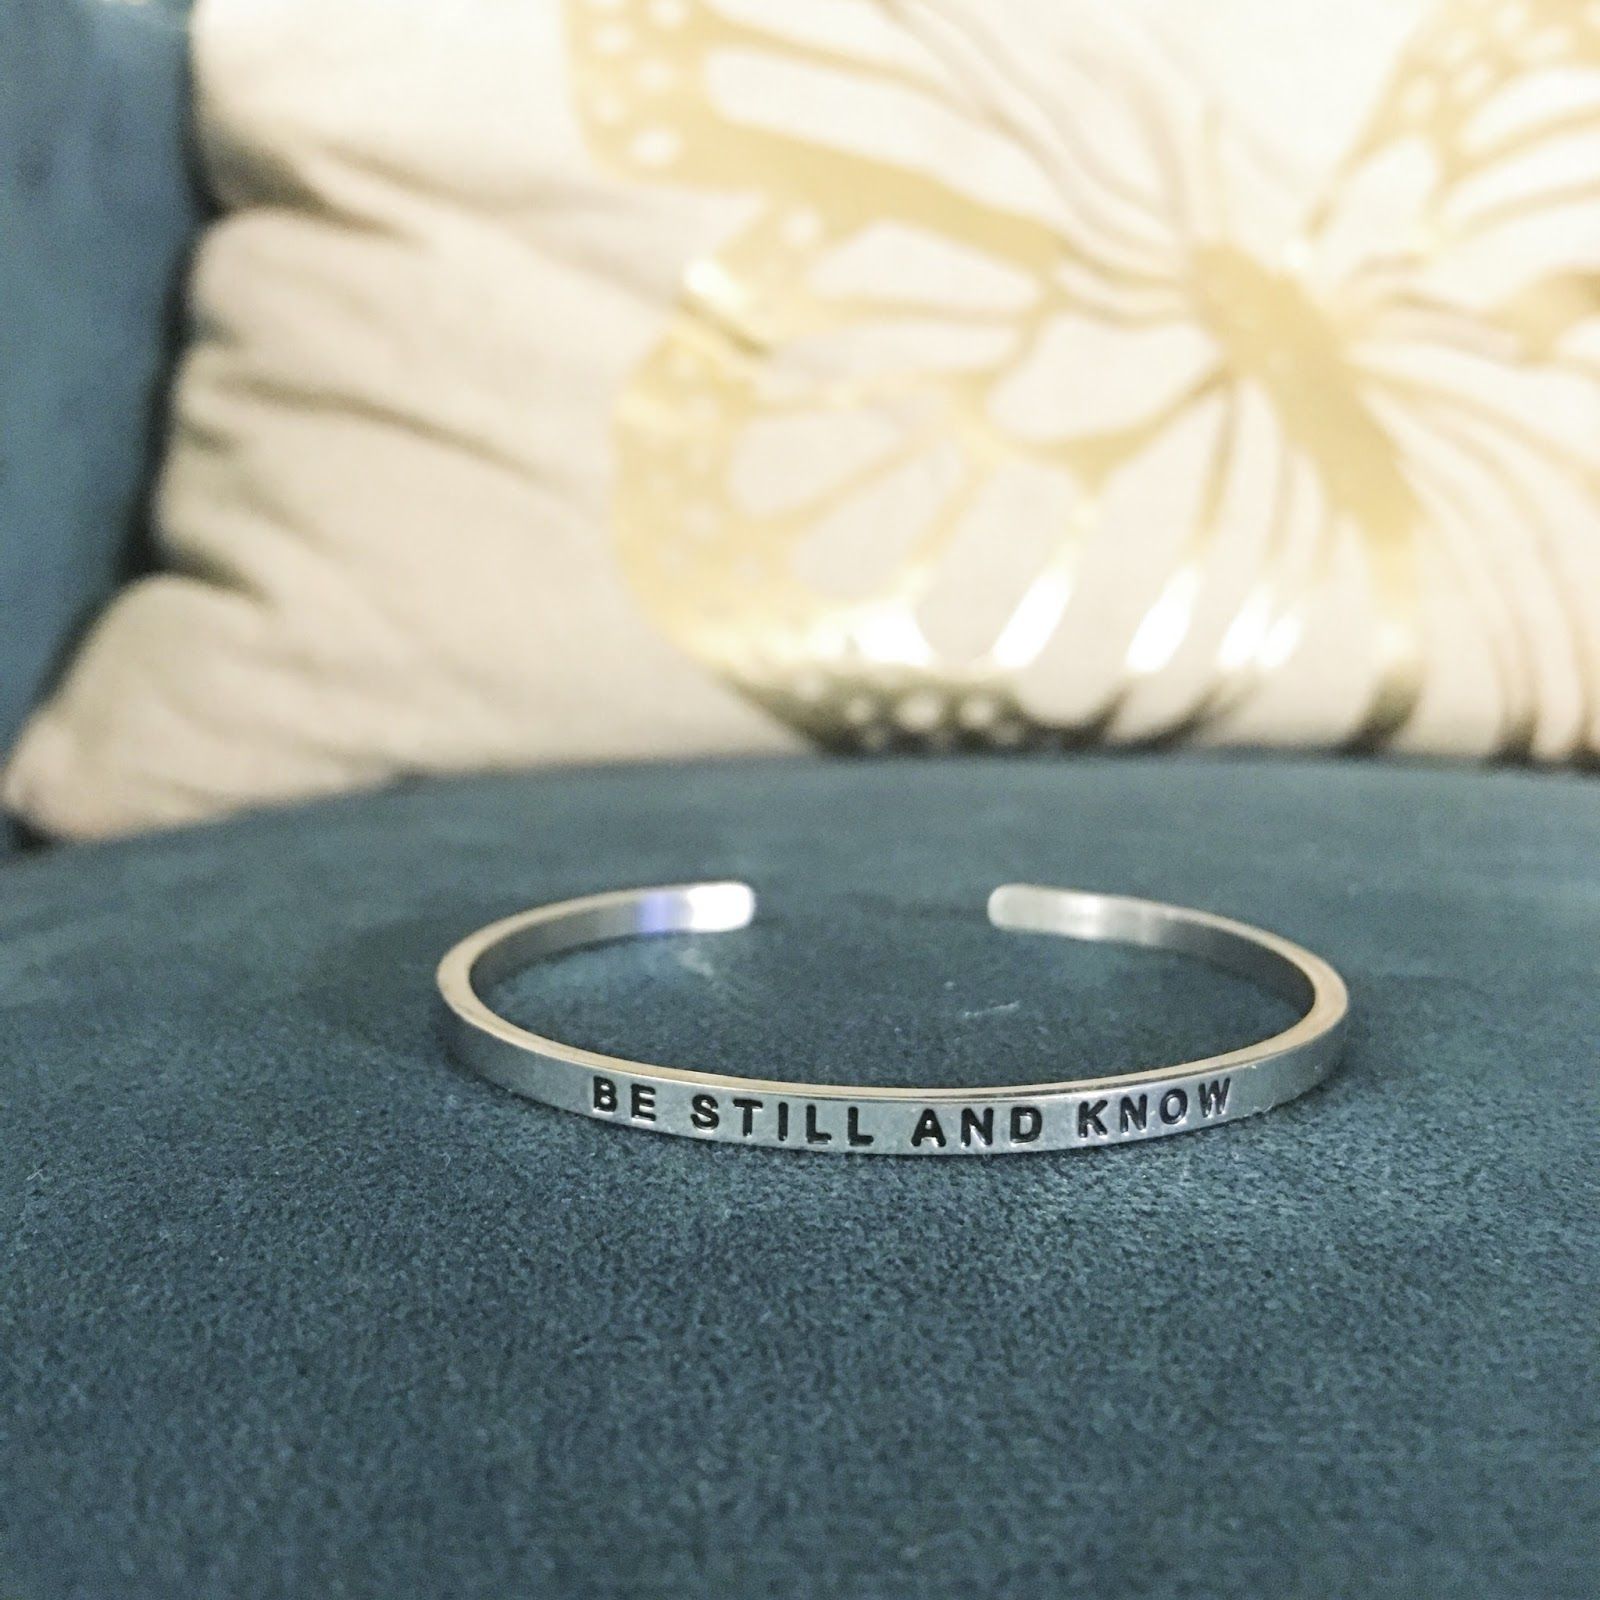 A silver bracelet engraved with the words "Be Still and Know"